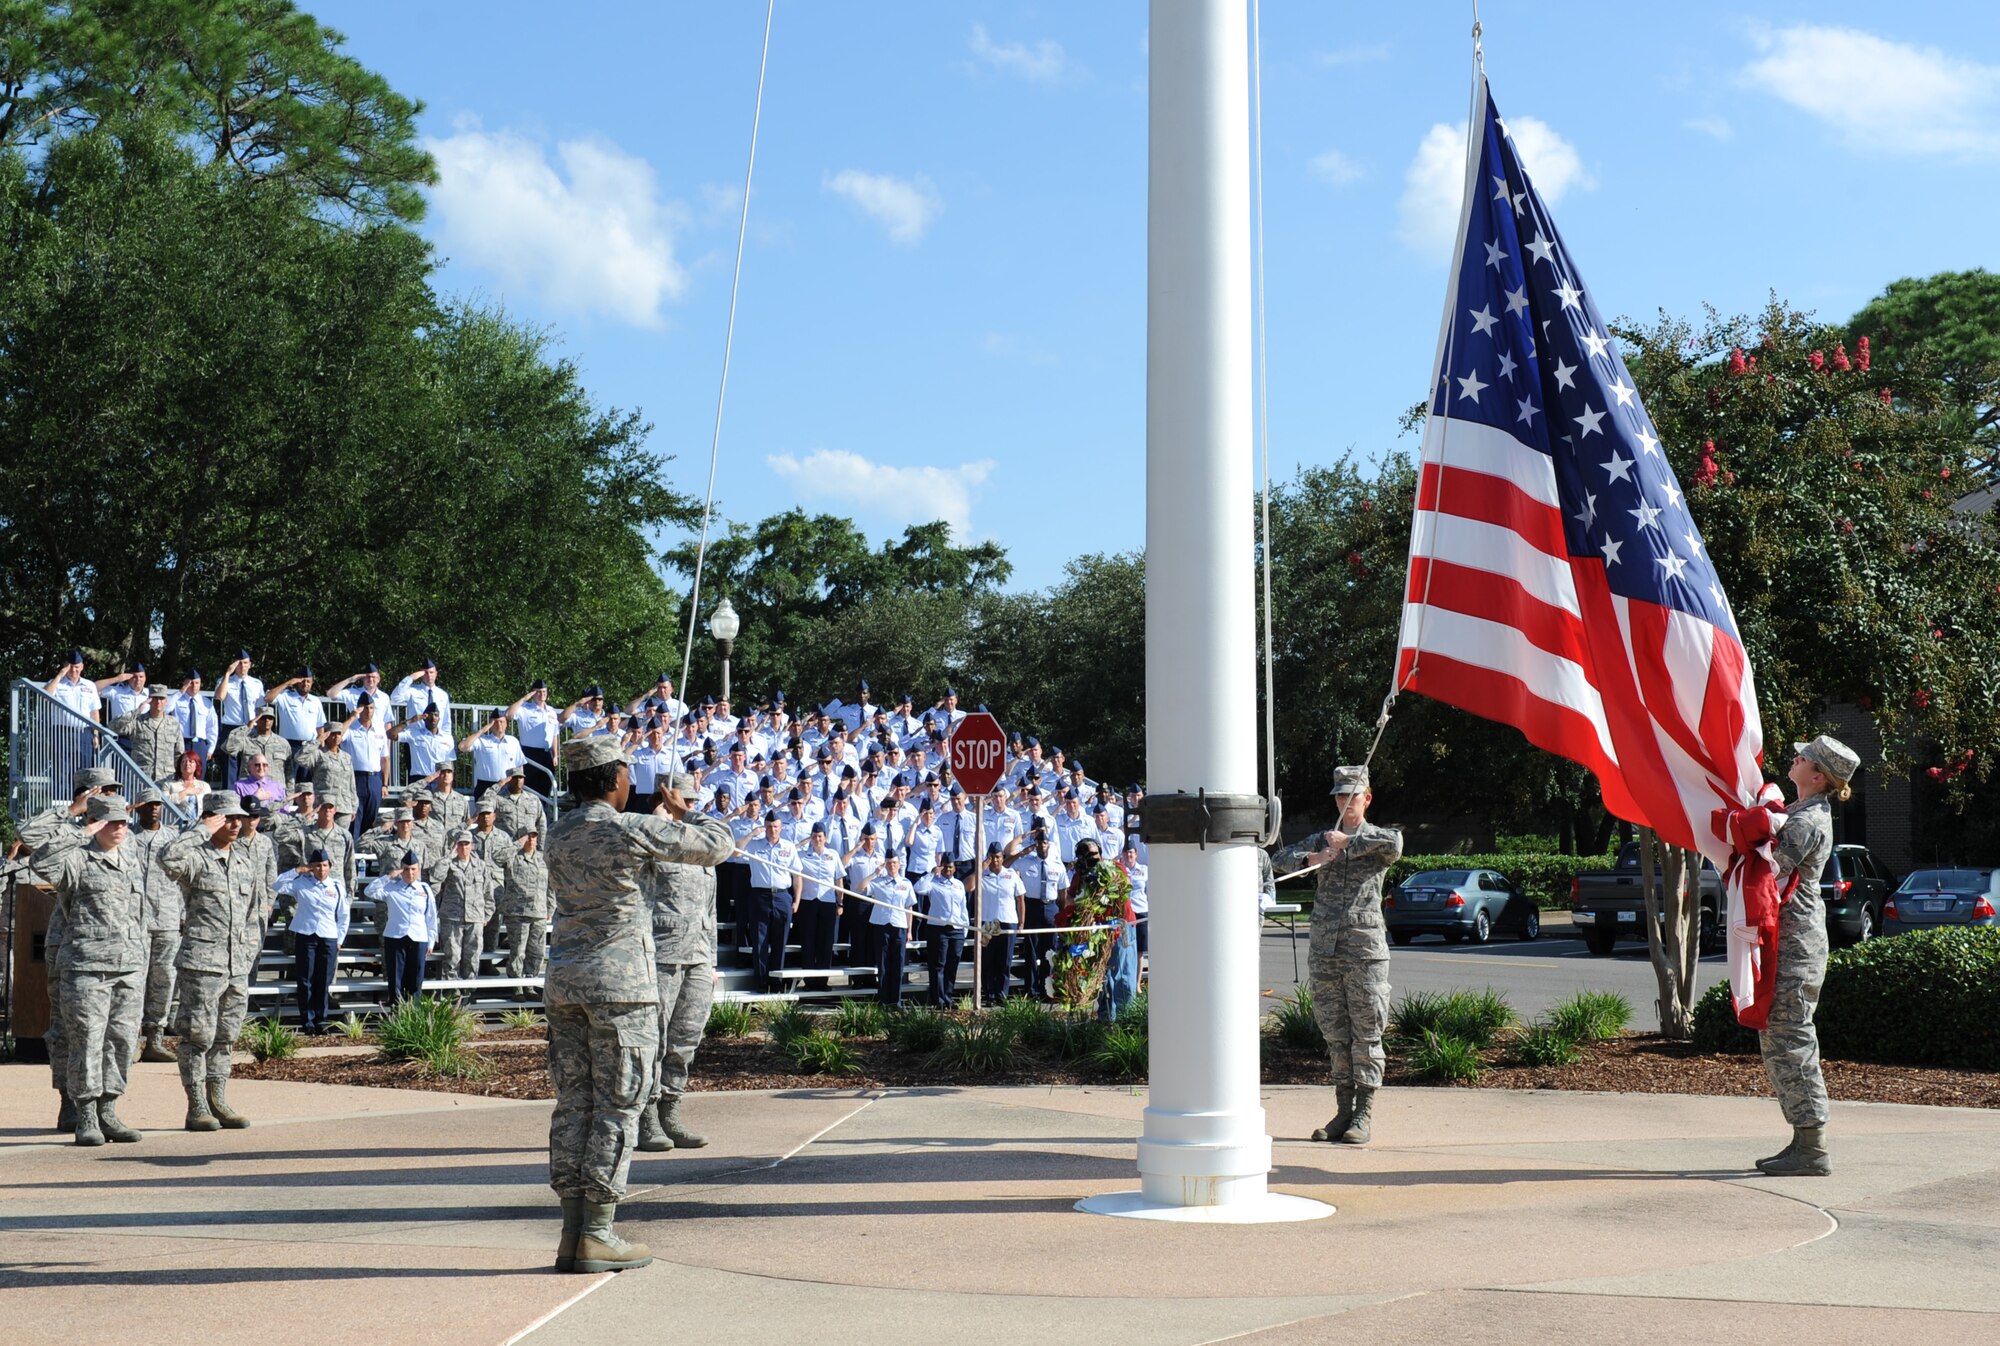 Keesler personnel lower the U.S. flag during a 9/11 memorial ceremony, Sept. 12, 2016, on Keesler Air Force Base, Miss. Fifteen years ago on Sept. 11, 2001, 19 terrorists simultaneously hijacked four passenger jets; flying one into the Pentagon in Washington, D.C., two into the World Trade Center in New York City, New York and one crashing outside of Shanksville, Pa. A total of 2,996 people were killed in the attacks.  (U.S. Air Force photo by Kemberly Groue)